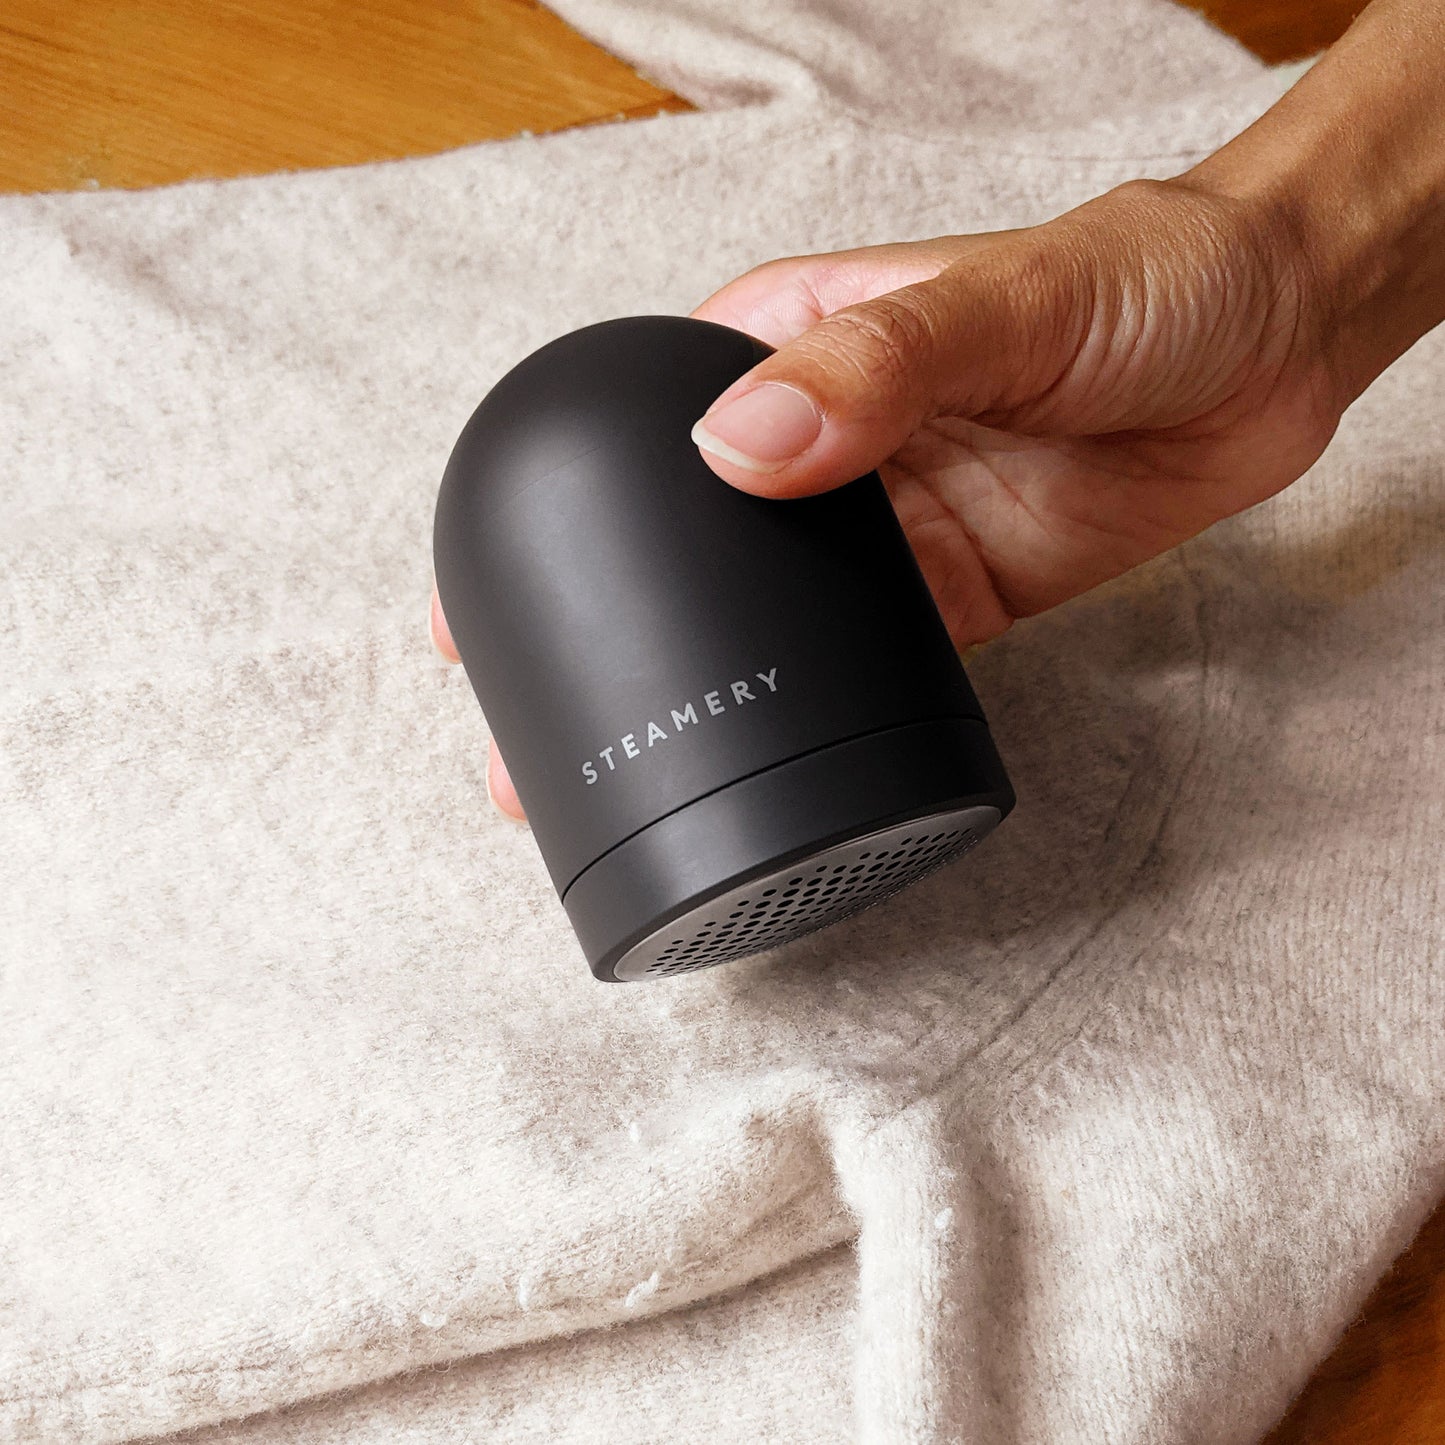 A tan hand holds a sleek dome shaped charcoal colored fabric shaver above a cream sweater; the word "Steamery" is written across the bottom of the device